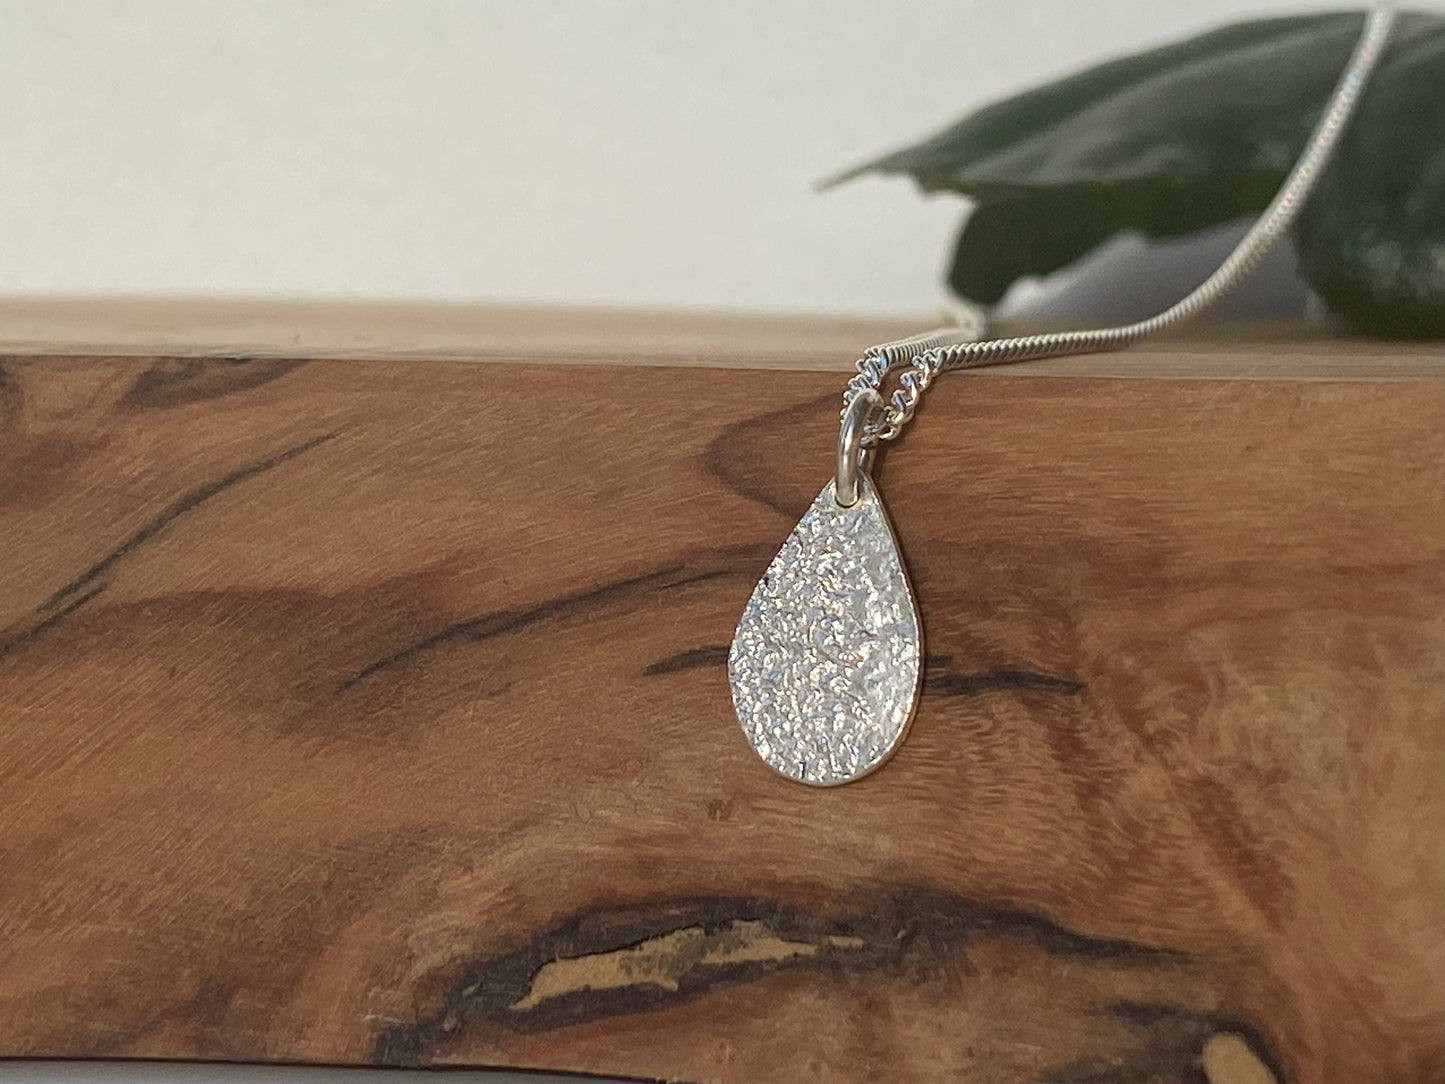 Reticulated silver drop necklace